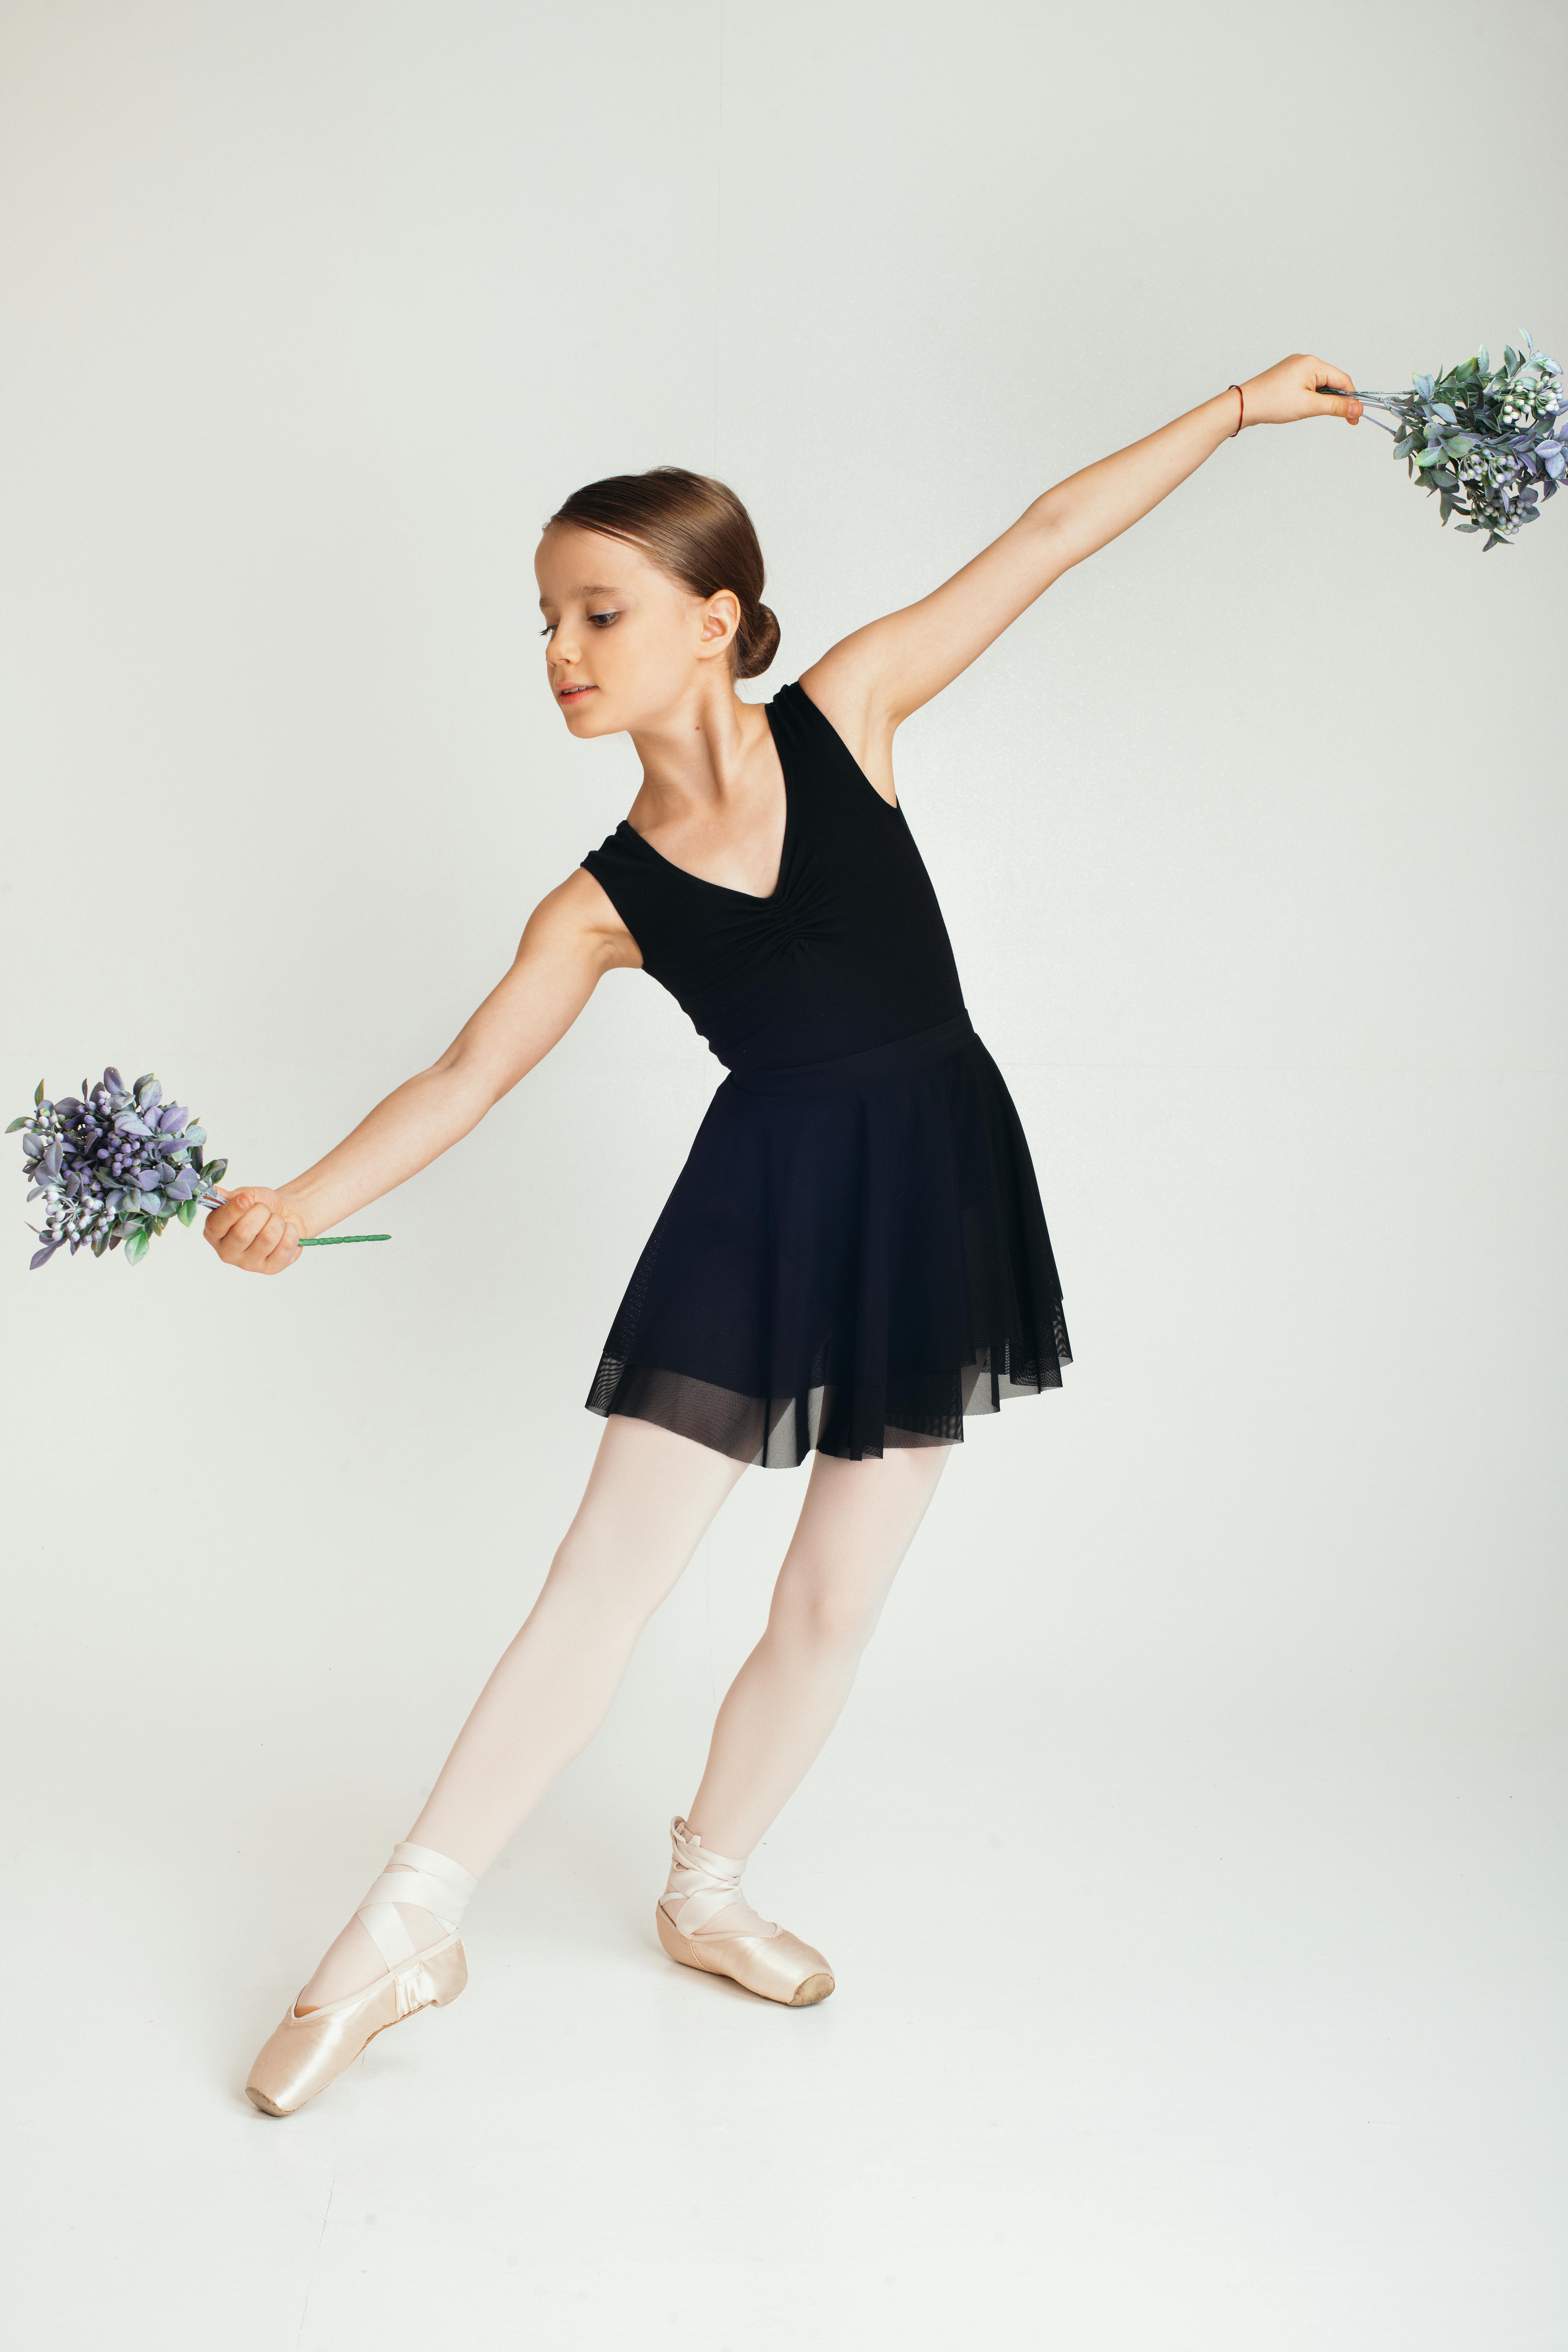 Ballerina & Dance Pose Ideas For Pictures